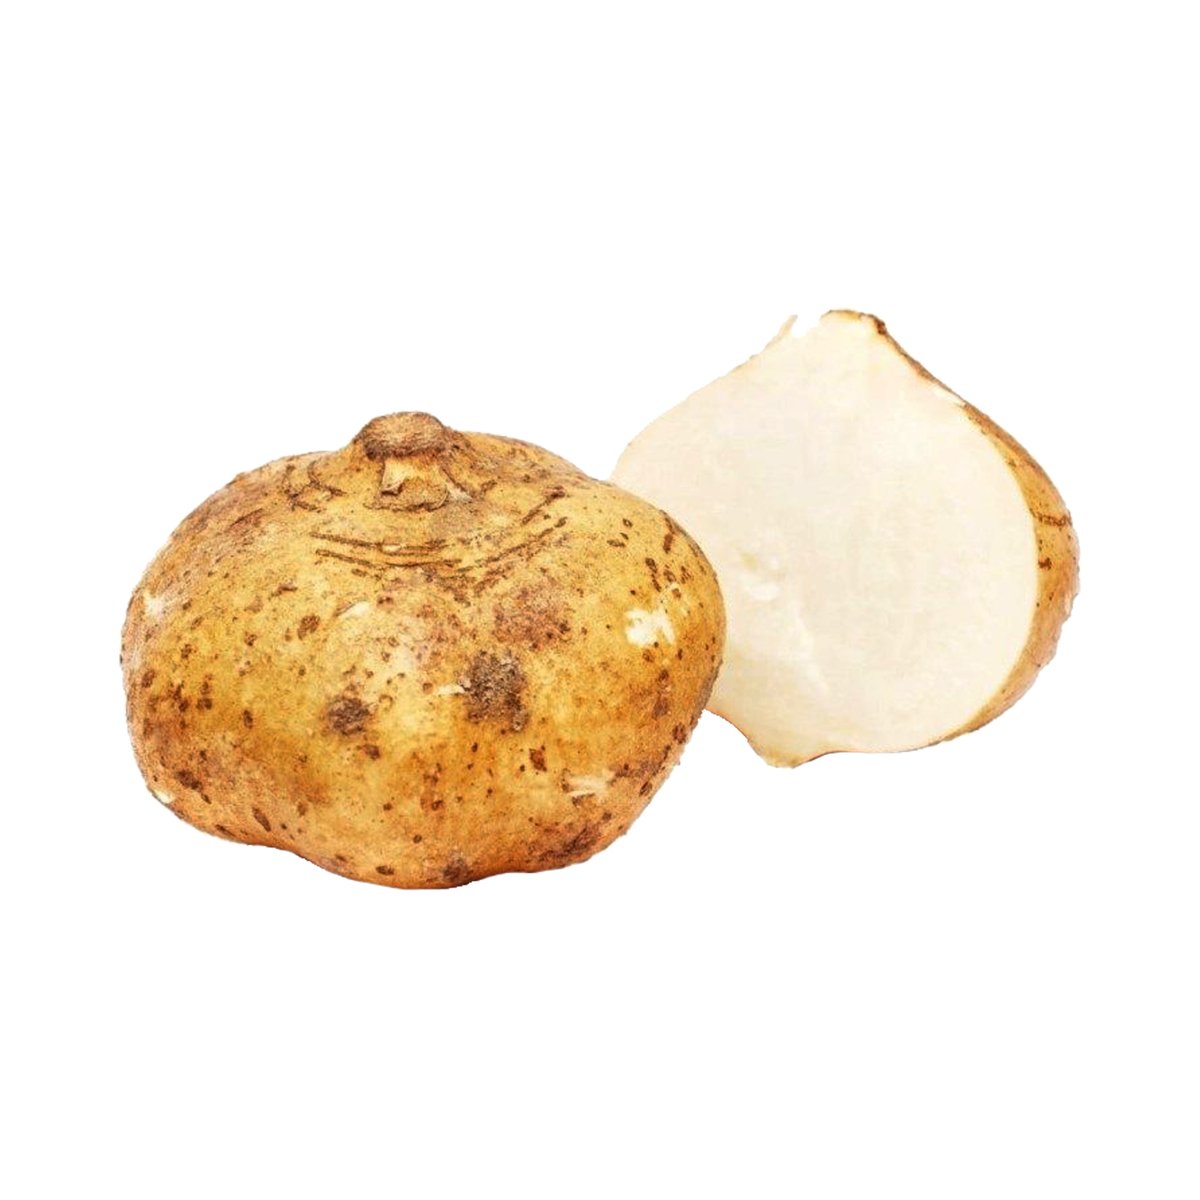 Turnip 500g Approx Weight